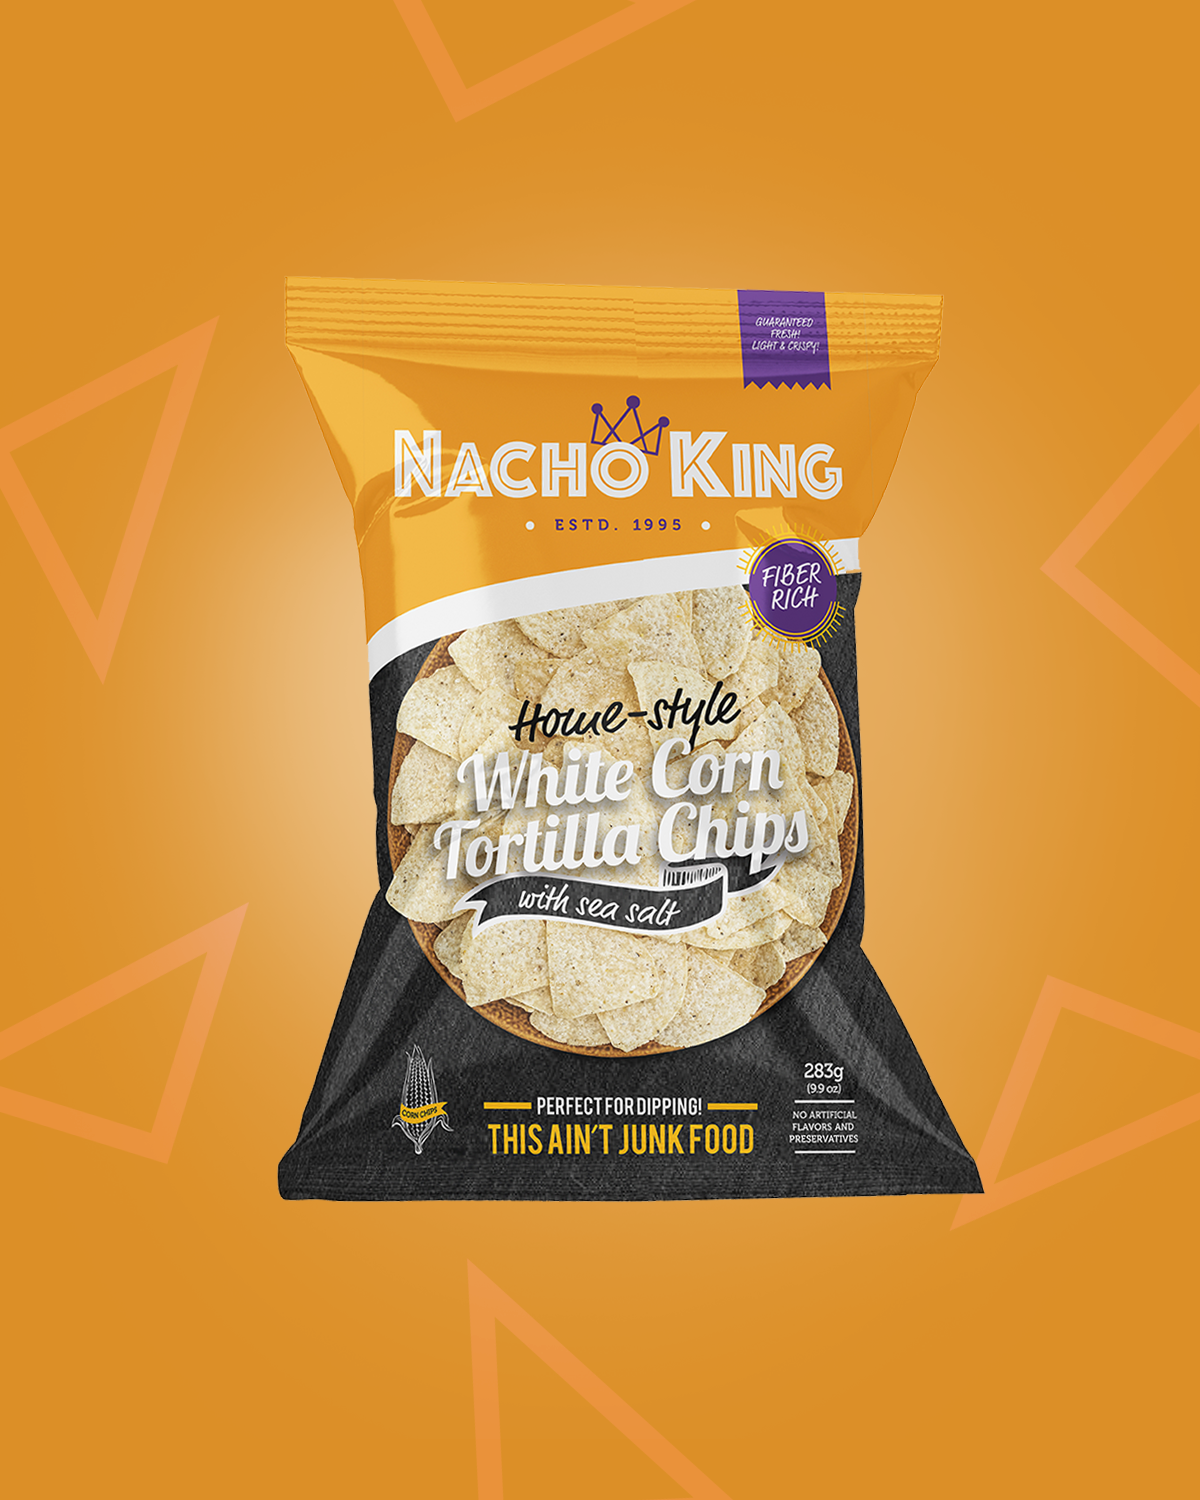 A pack of Nacho King Home Style White Corn Tortilla Chips, Local Corn Chips